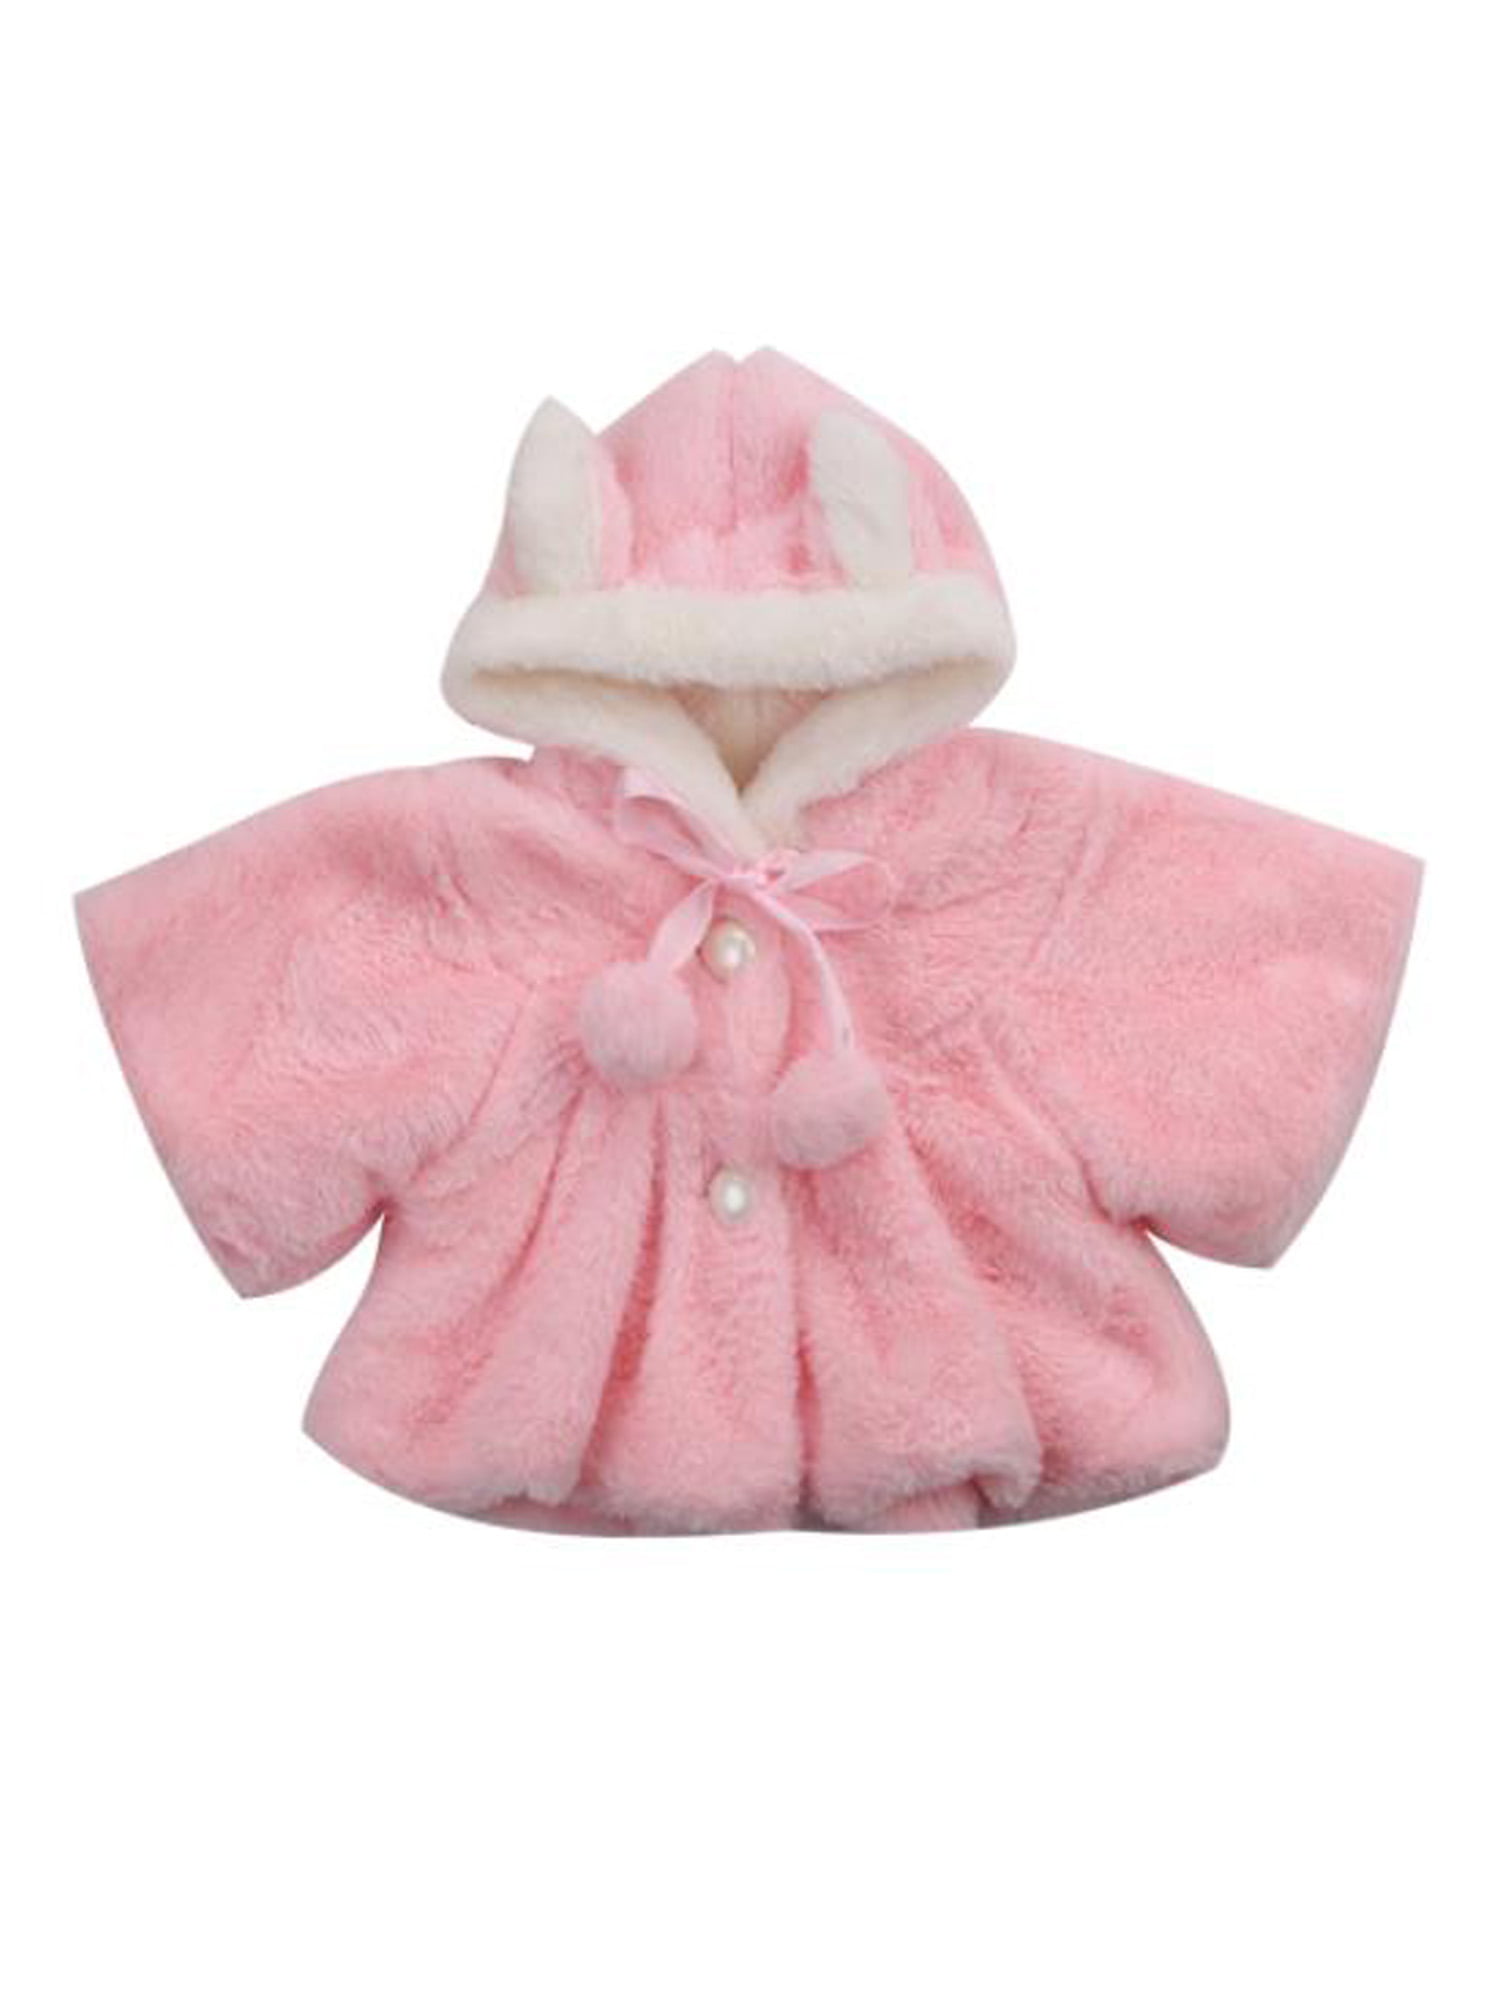 EFINNY Infant Baby Girl Winter Warm Hooded Coat Cloak Cute Faux Fur Thick Jacket Clothes Outwear for 0~48 Months 